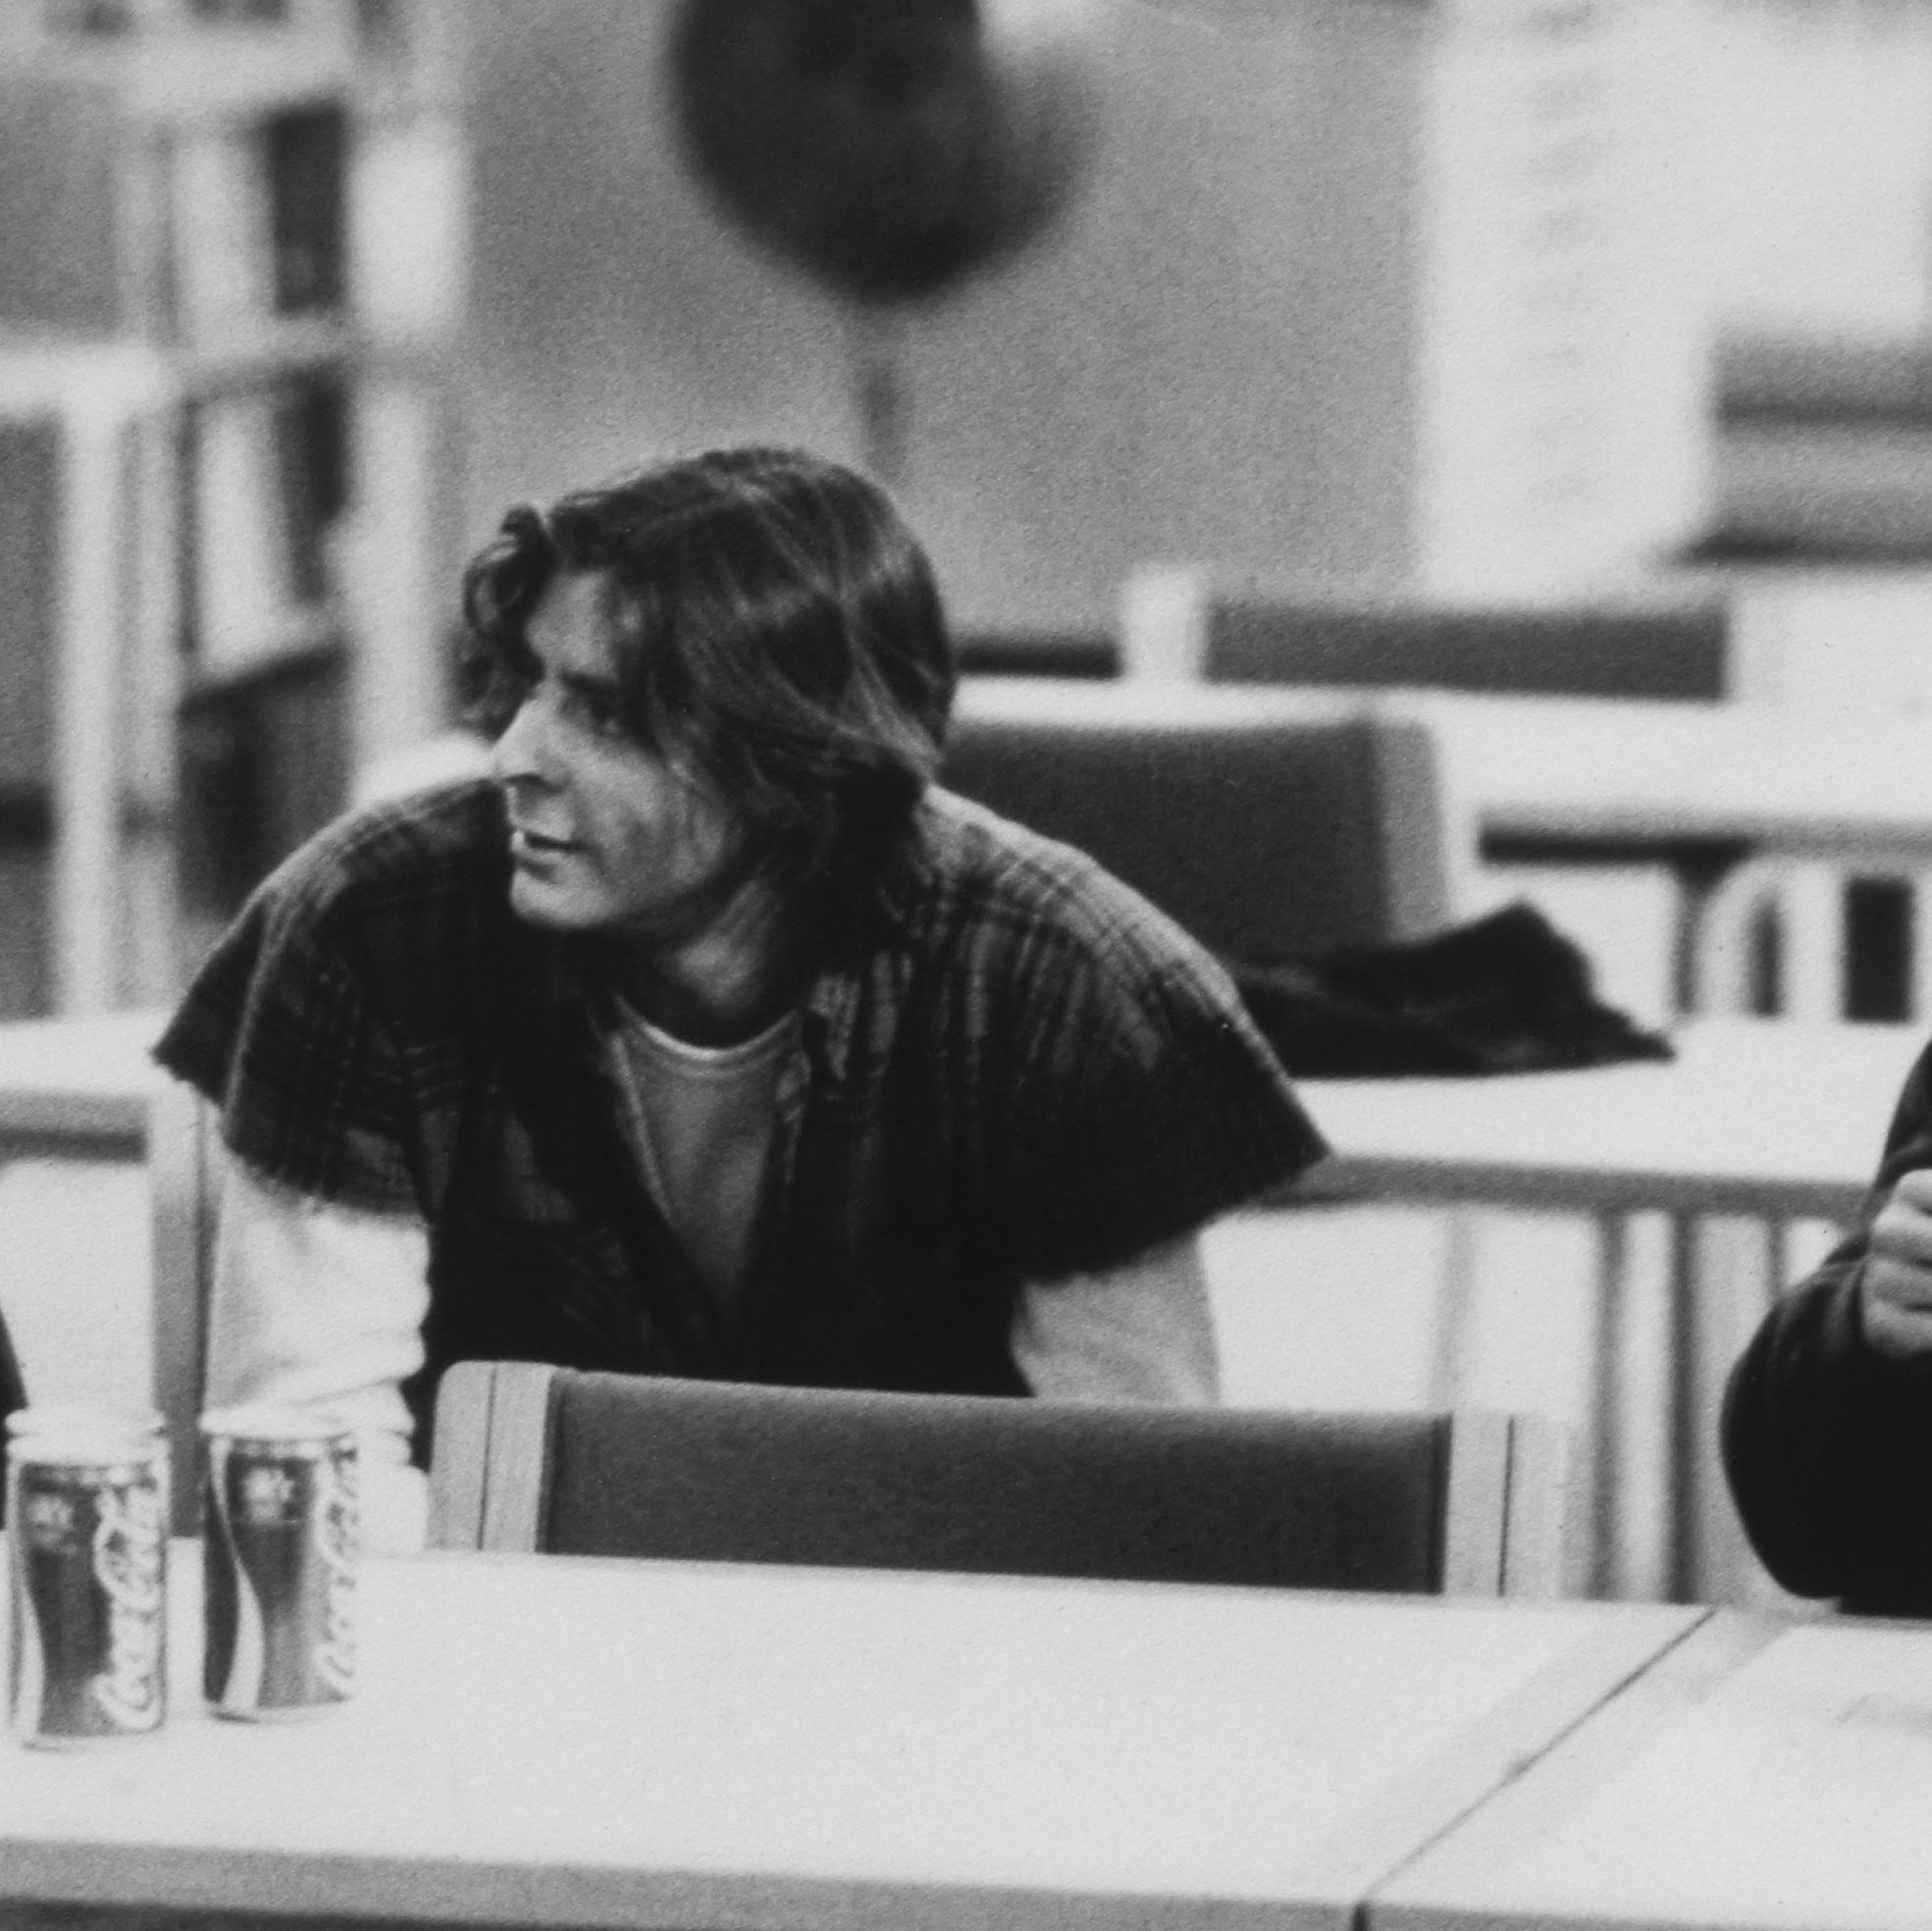 the breakfast club judd nelson quotes